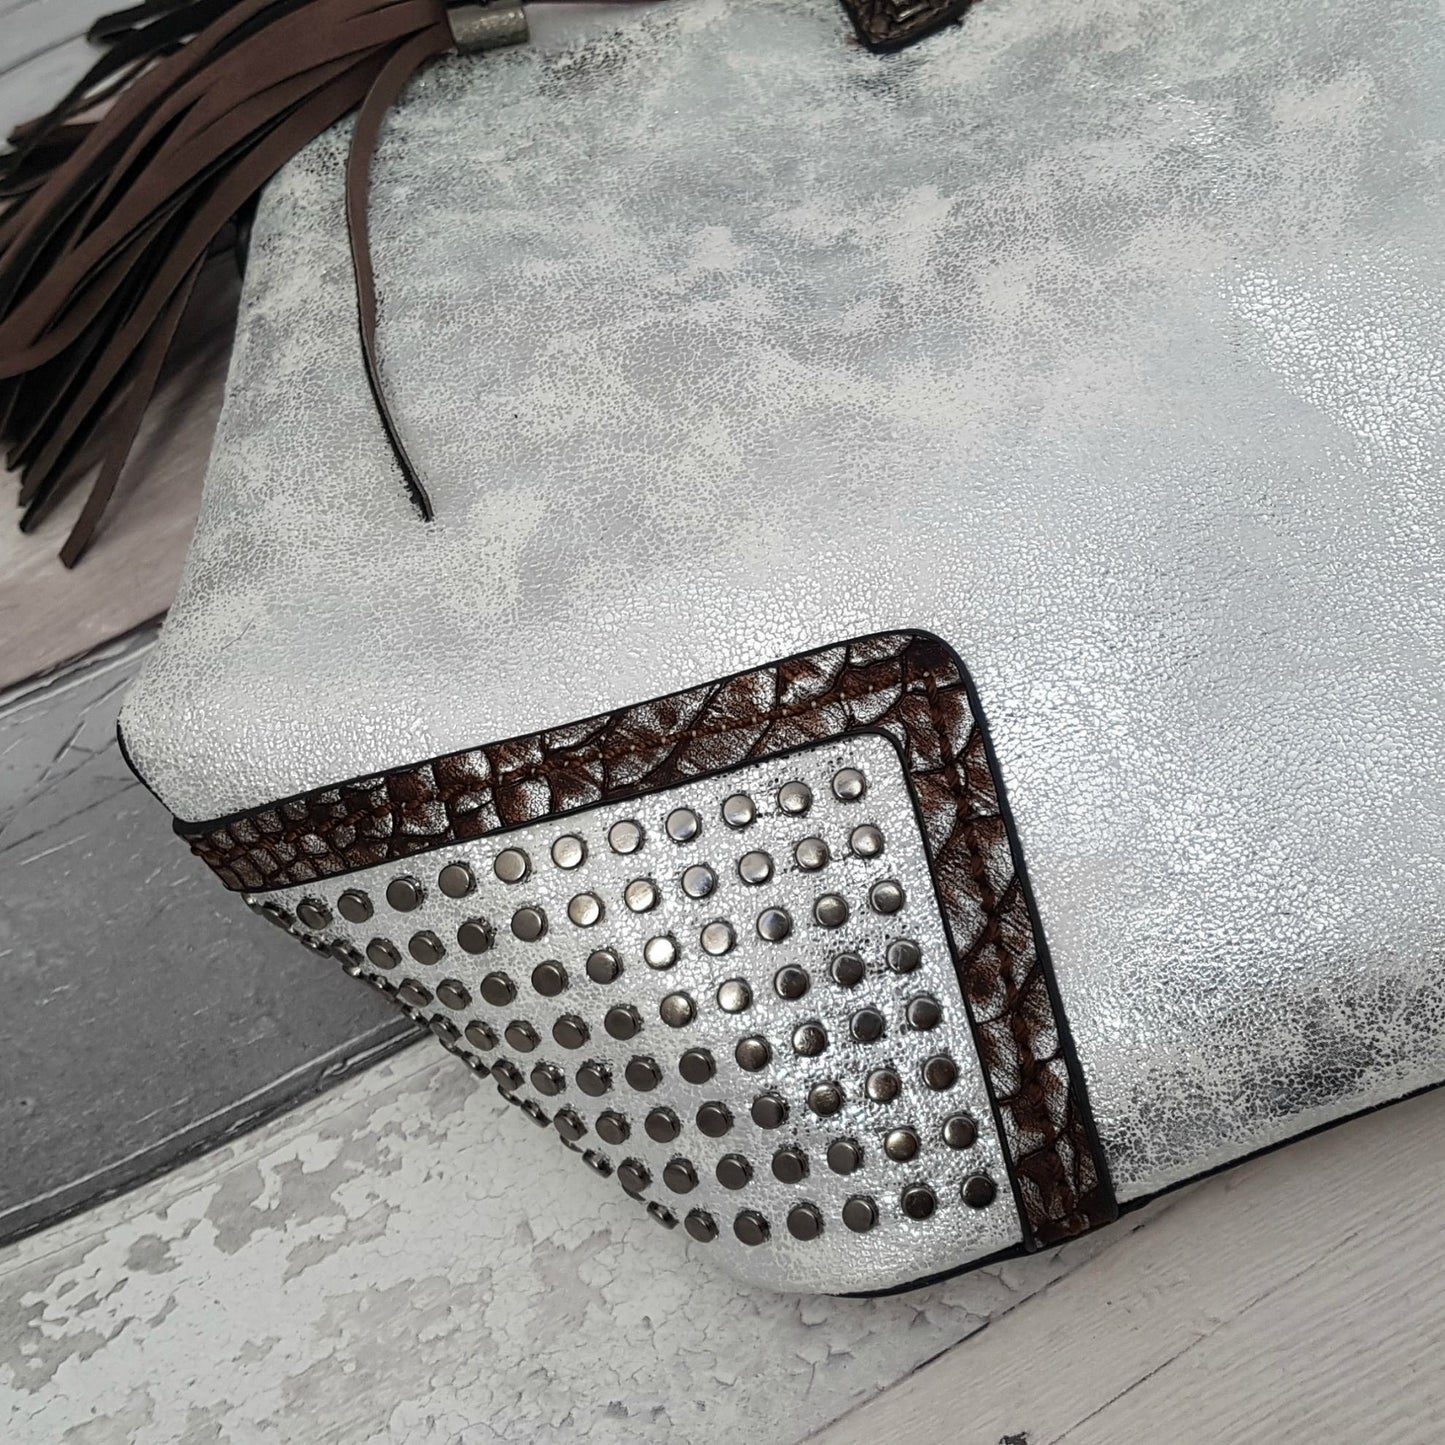 White Shoulder Bag with Metallic Silver Finish - End of Line